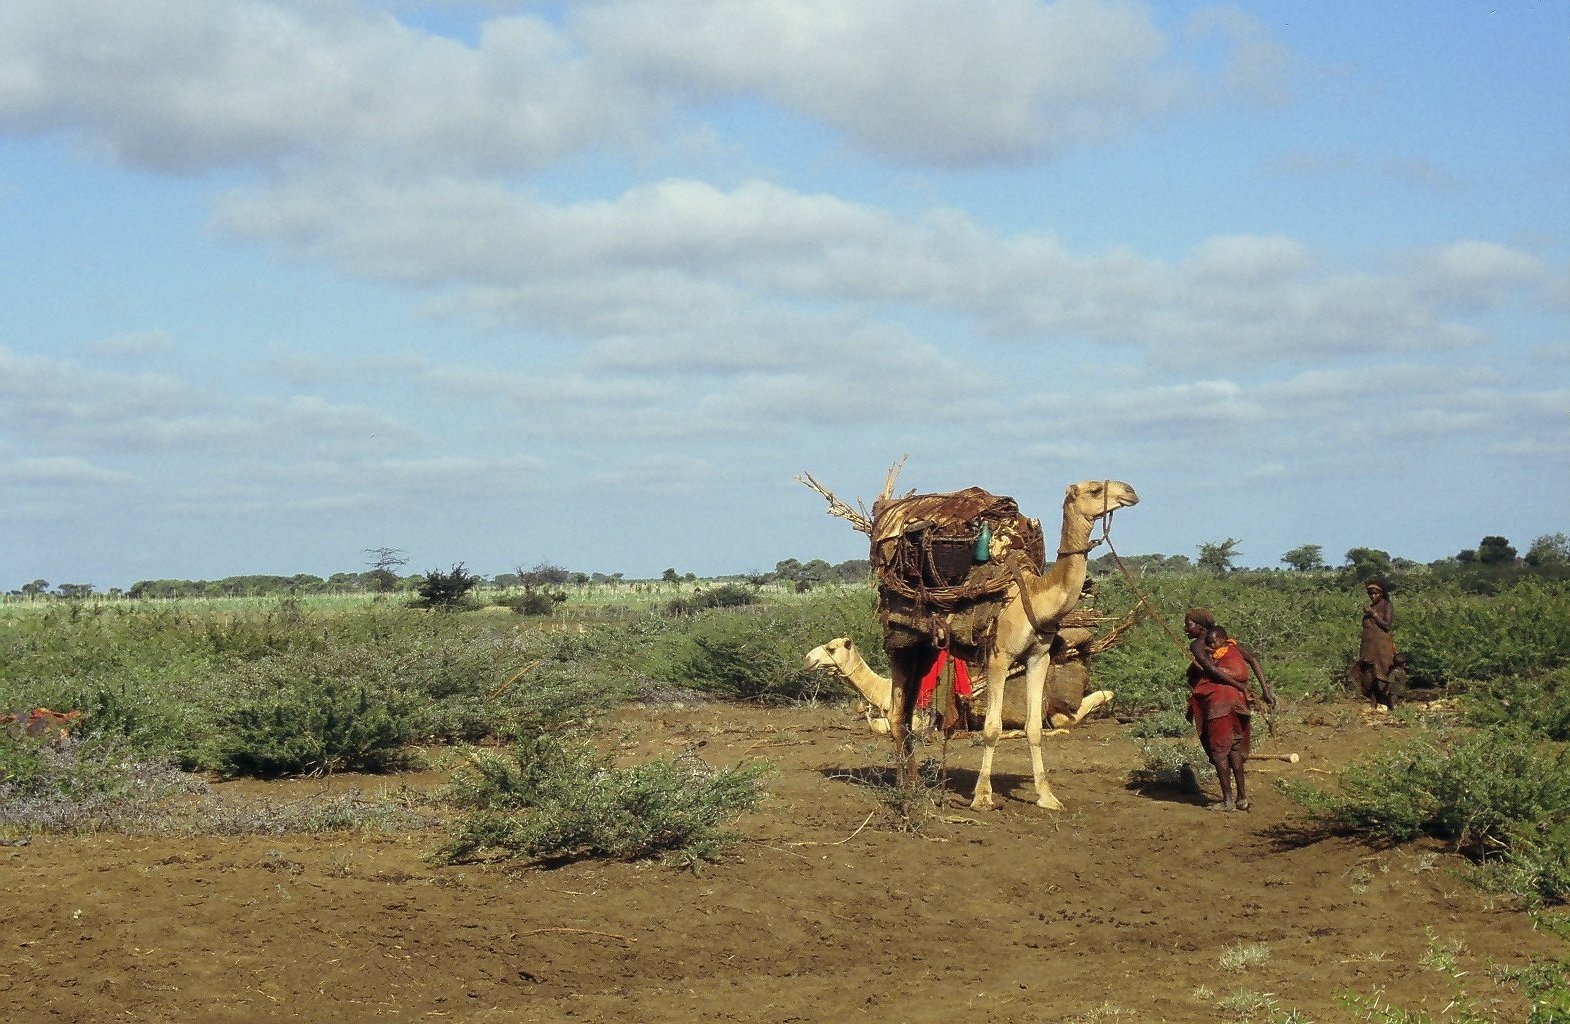 Women and camels on rangeland